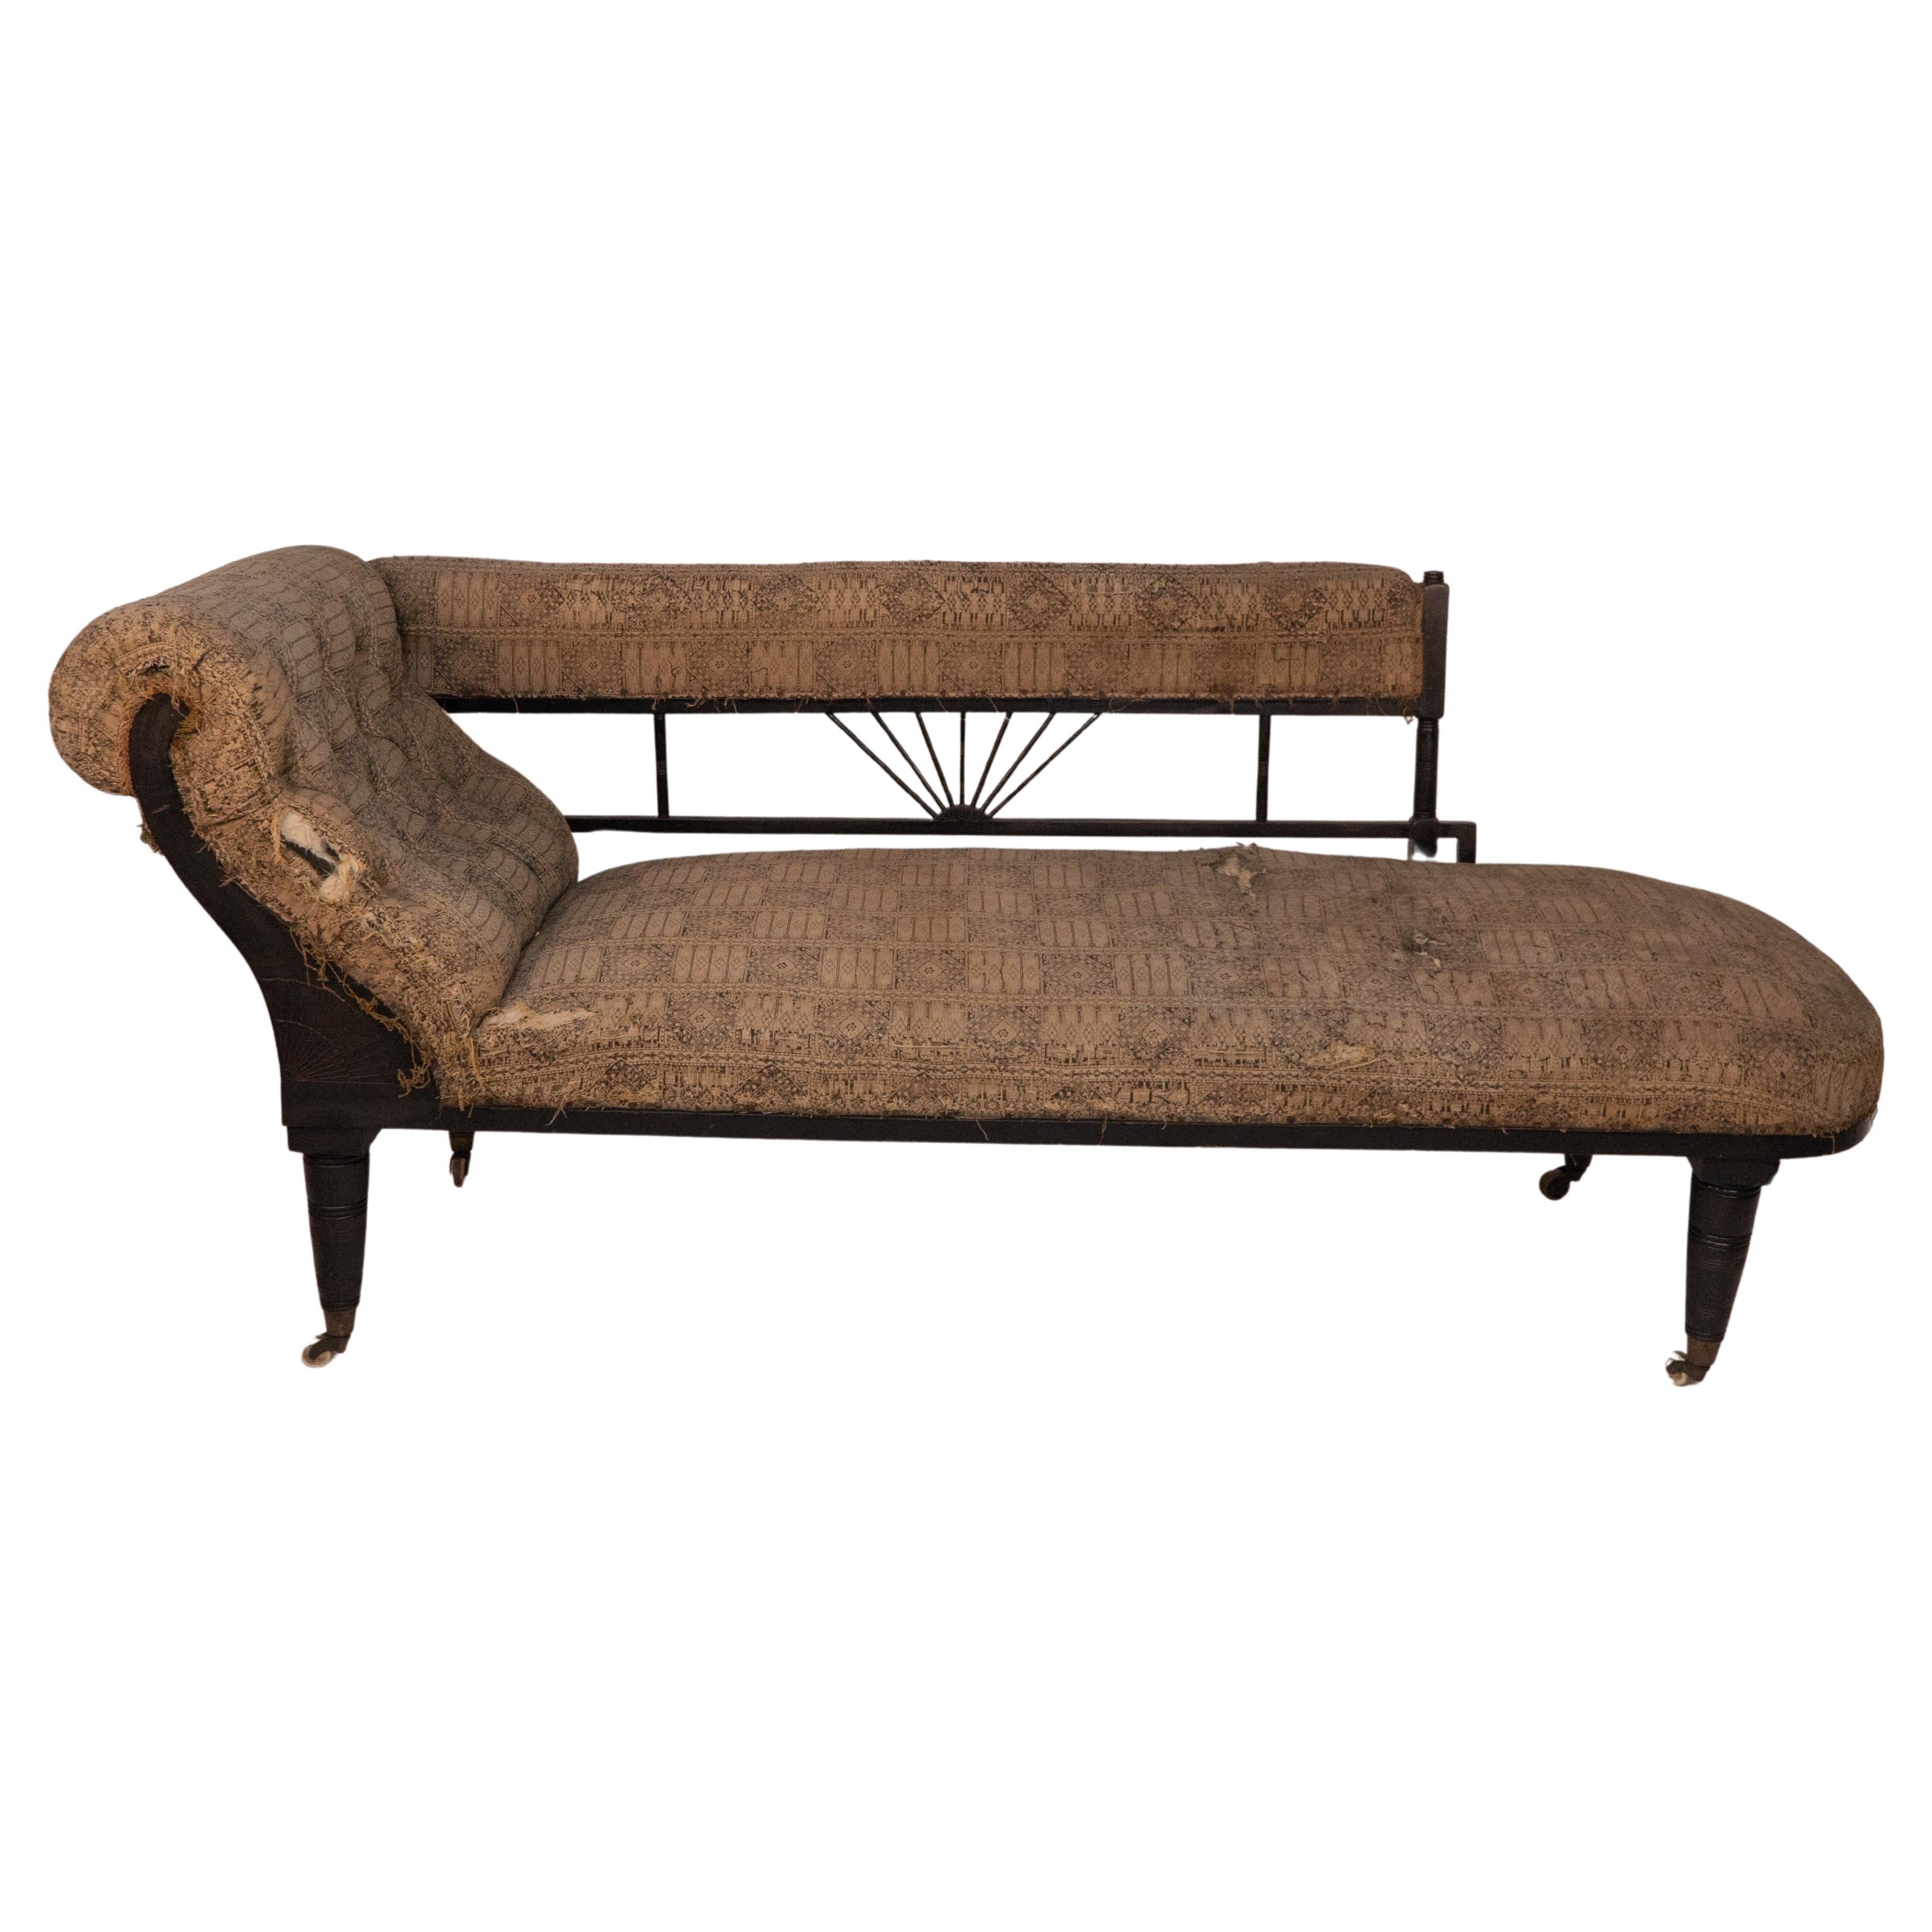 H W Batley (attributed). An Anglo-Japanese ebonized chaise lounge or day bed For Sale